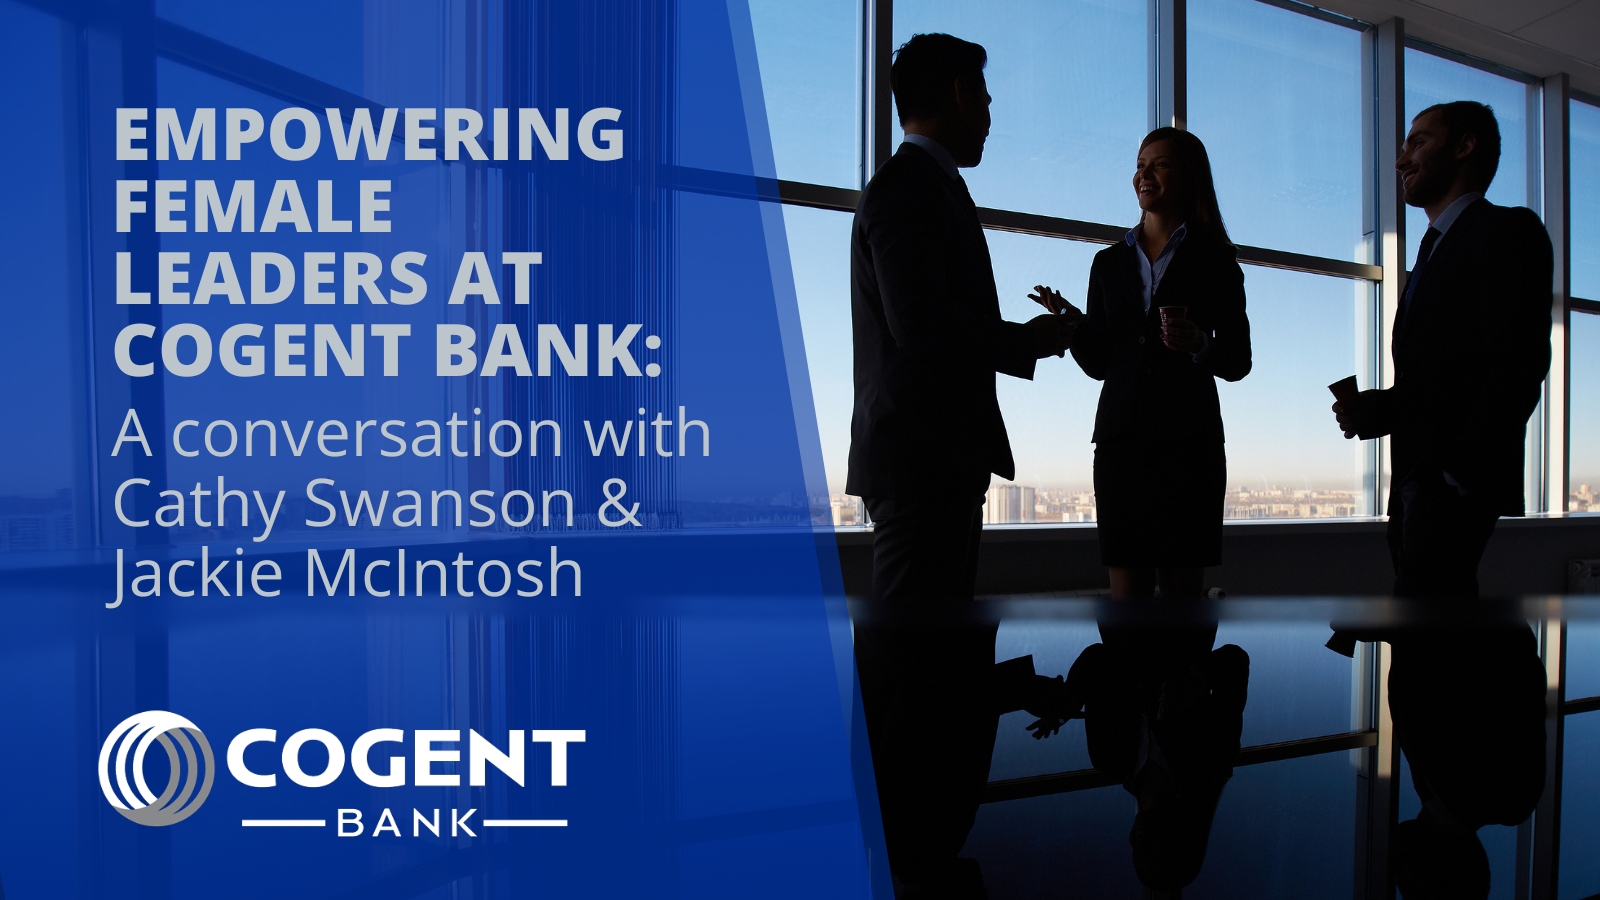 Empowering Female Leaders At Cogent Bank: A Conversation with Cathy Swanson & Jackie McIntosh